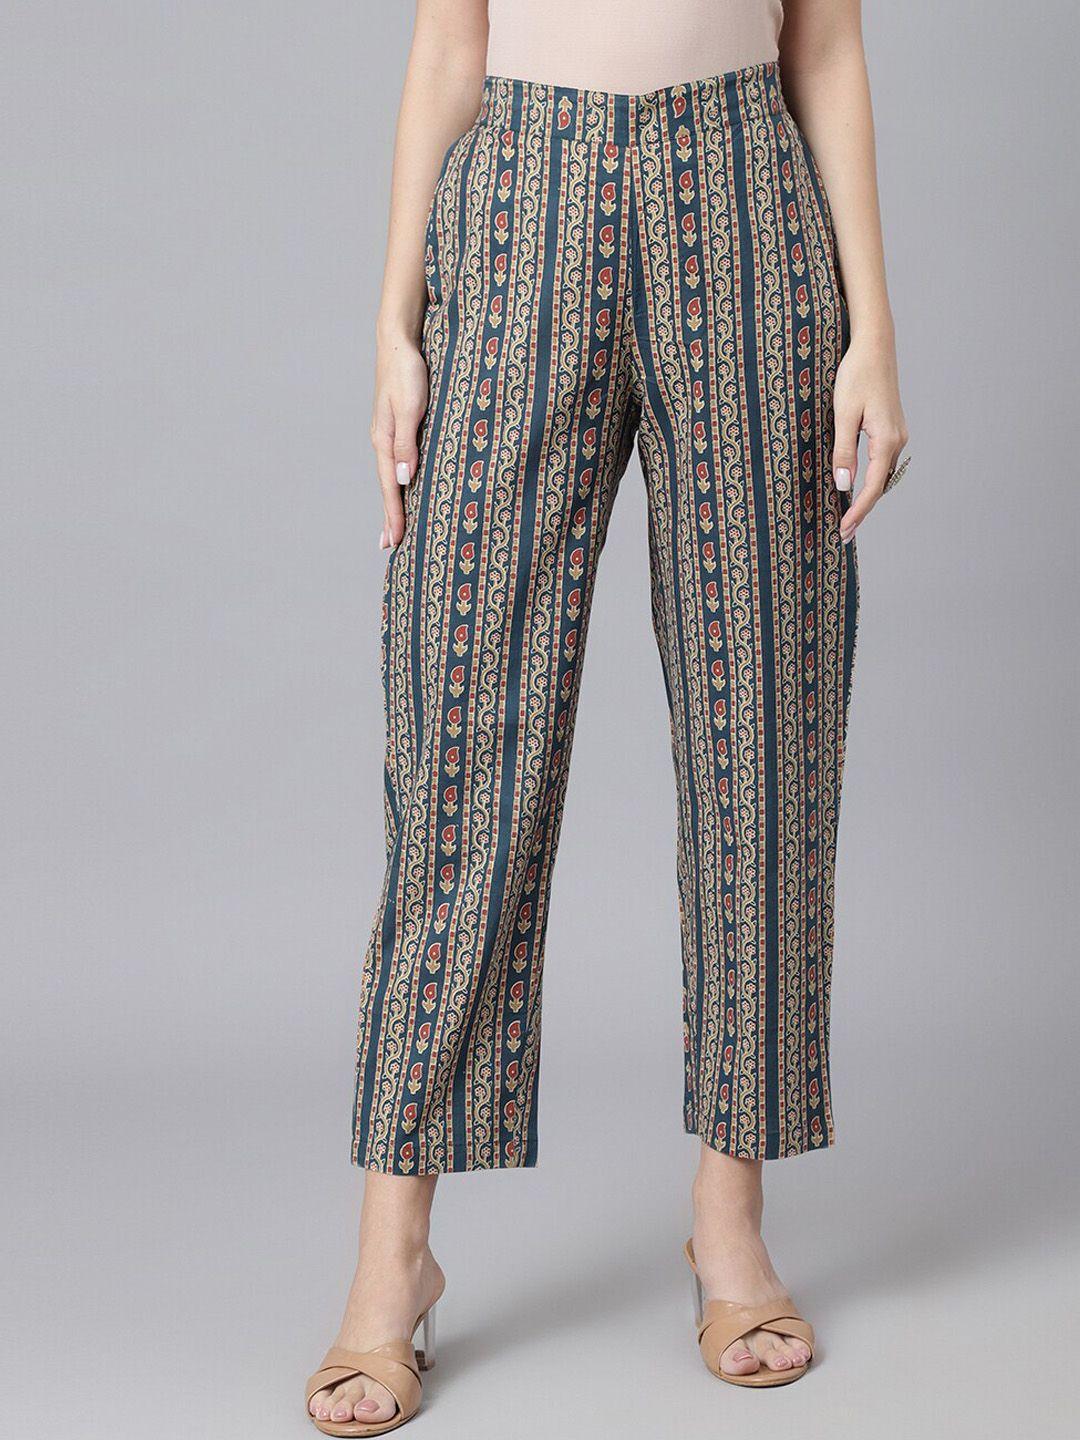 deckedup-women-ethnic-motifs-printed-relaxed-easy-wash-cotton-trousers